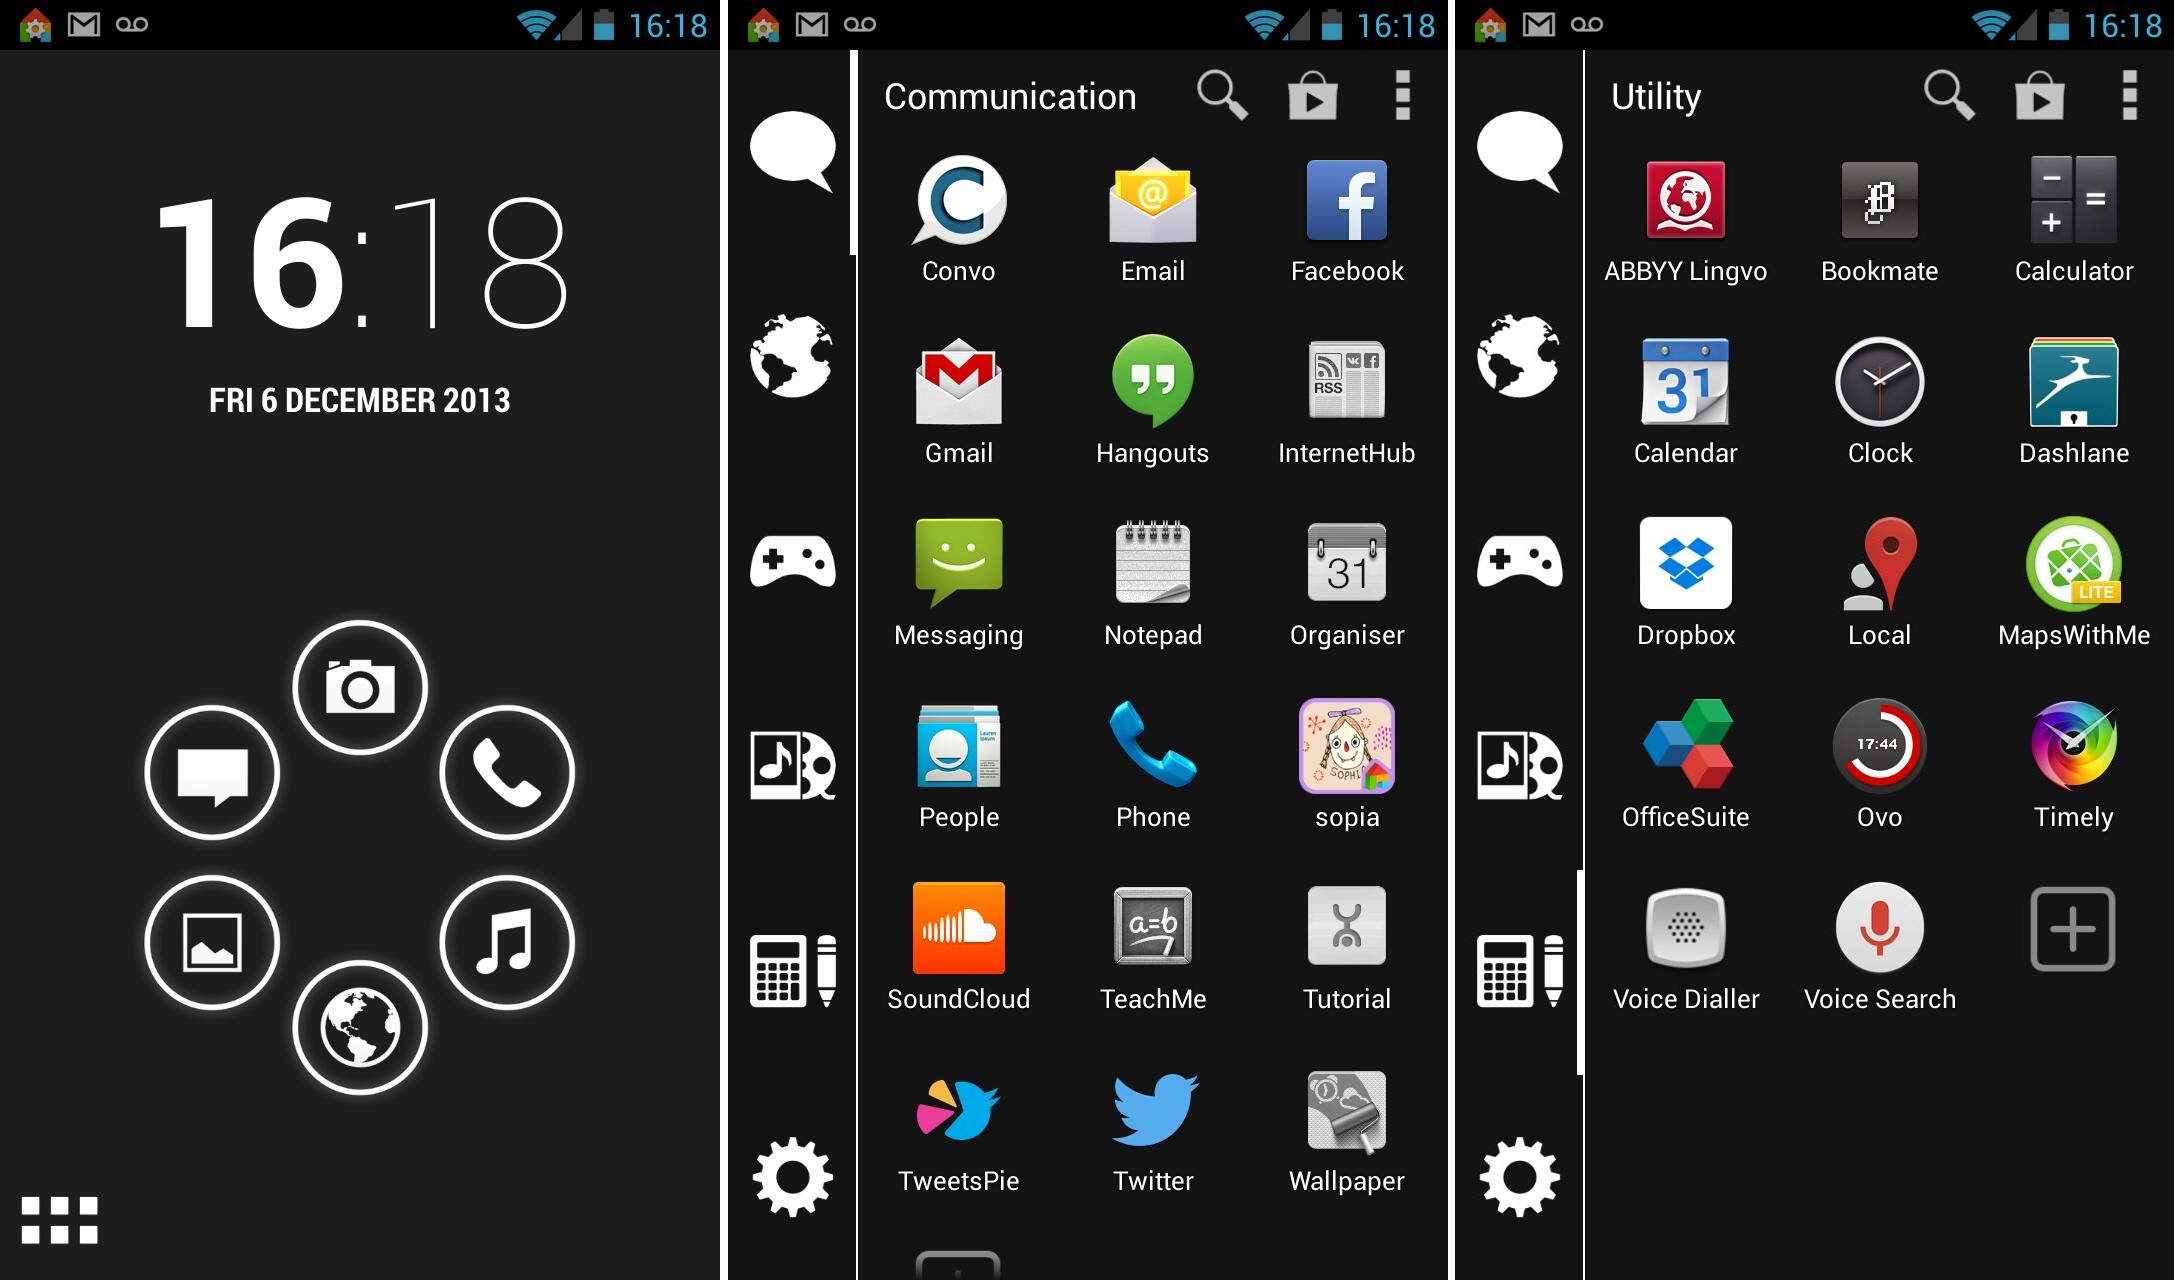 Android Phone Home Screen Icons